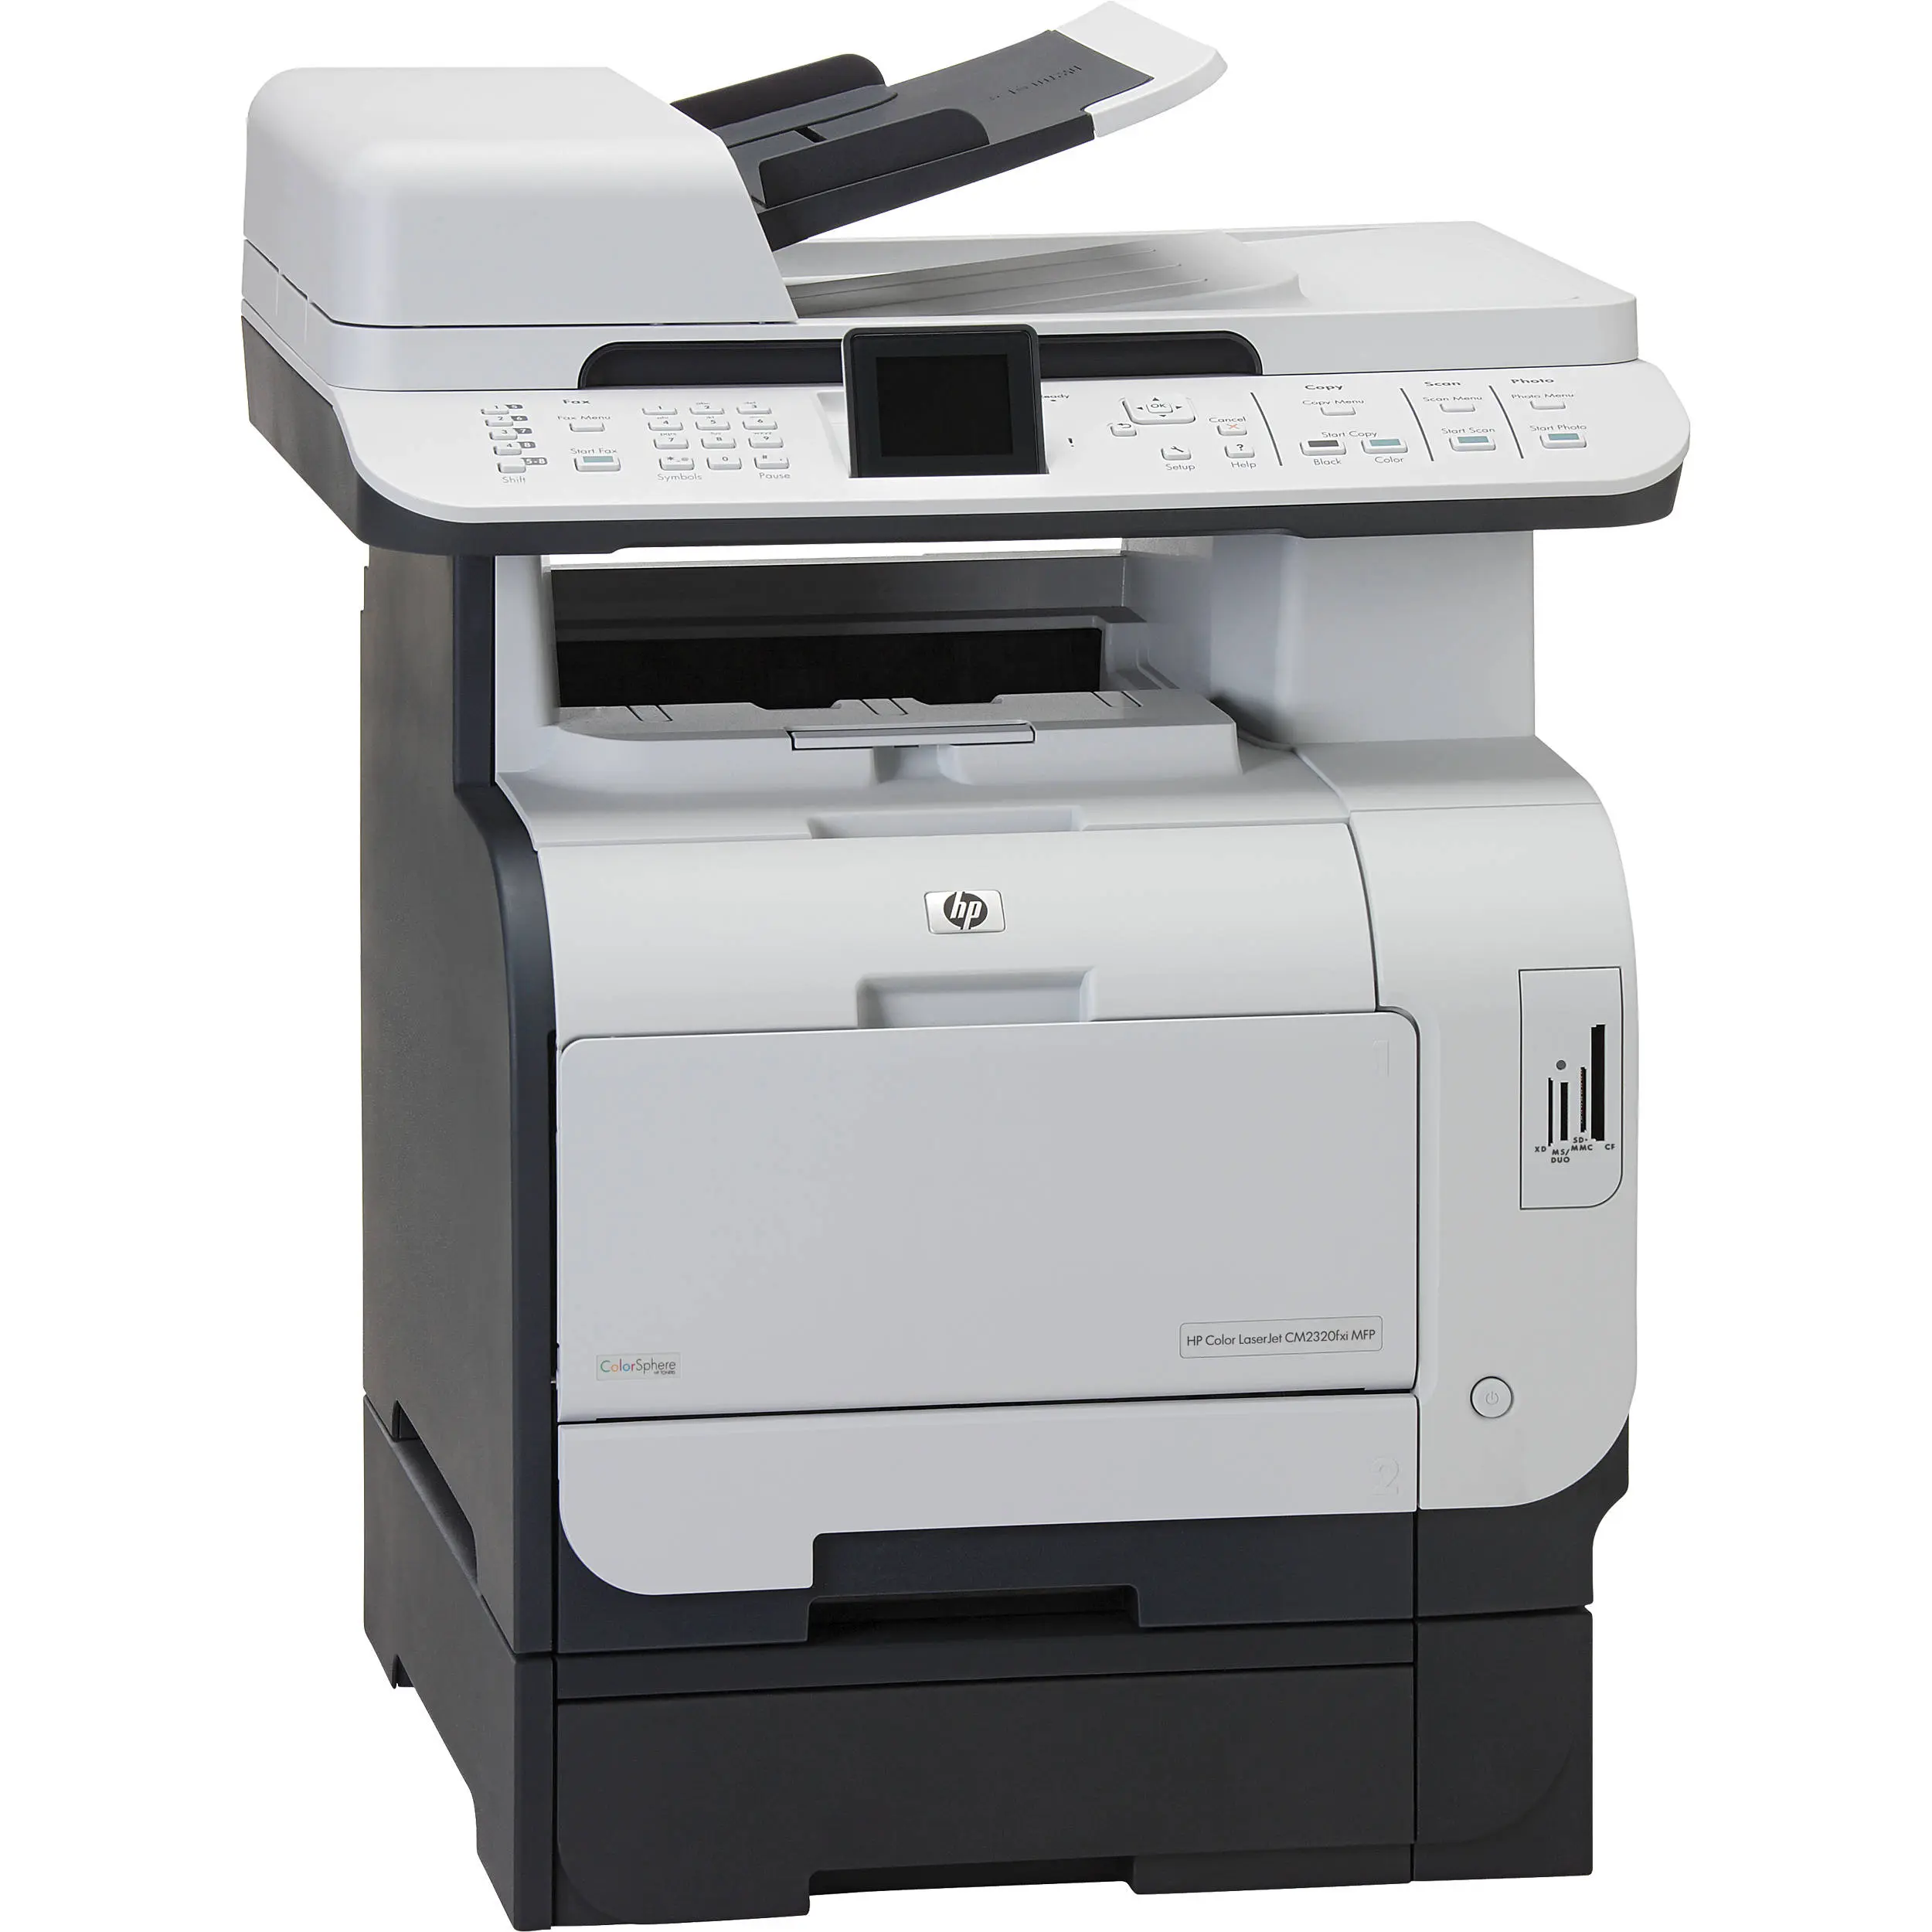 hewlett packard hp color laserjet cm2320fxi mfp driver - How do I scan from my HP cm2320 to my computer